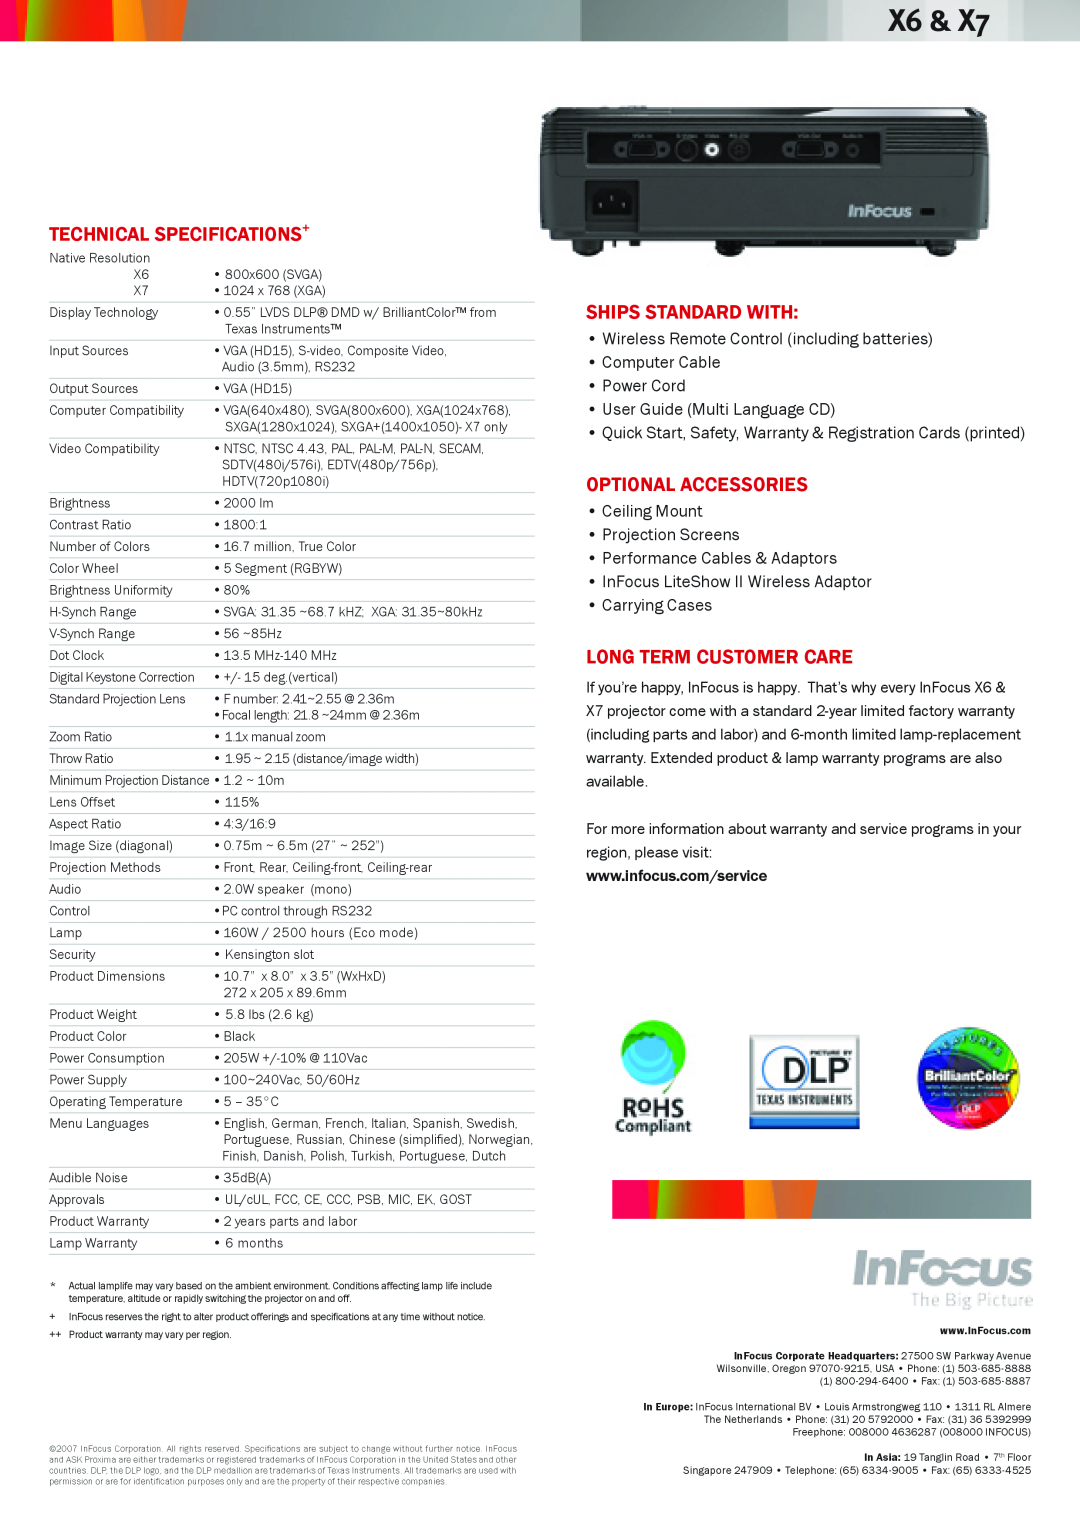 InFocus X6, X7 manual Technical Specifications+, Ships Standard With, Optional Accessories, long term customer care 